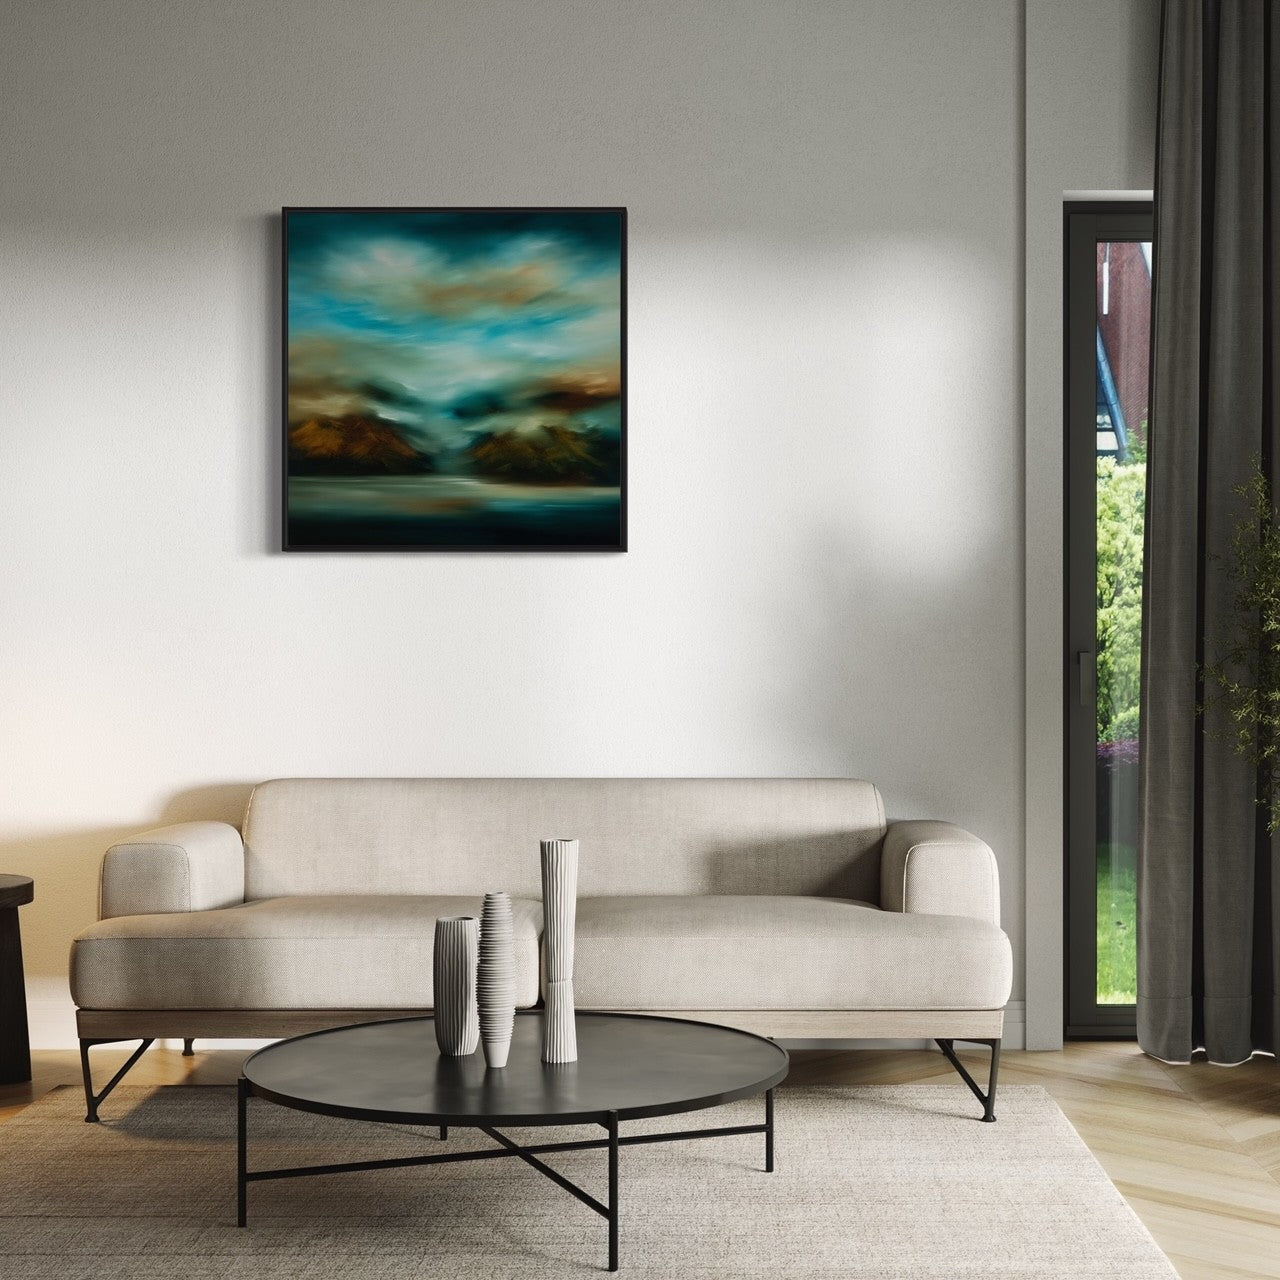 Abstract landscape in blue and hues of brown and gold hanging above sofa